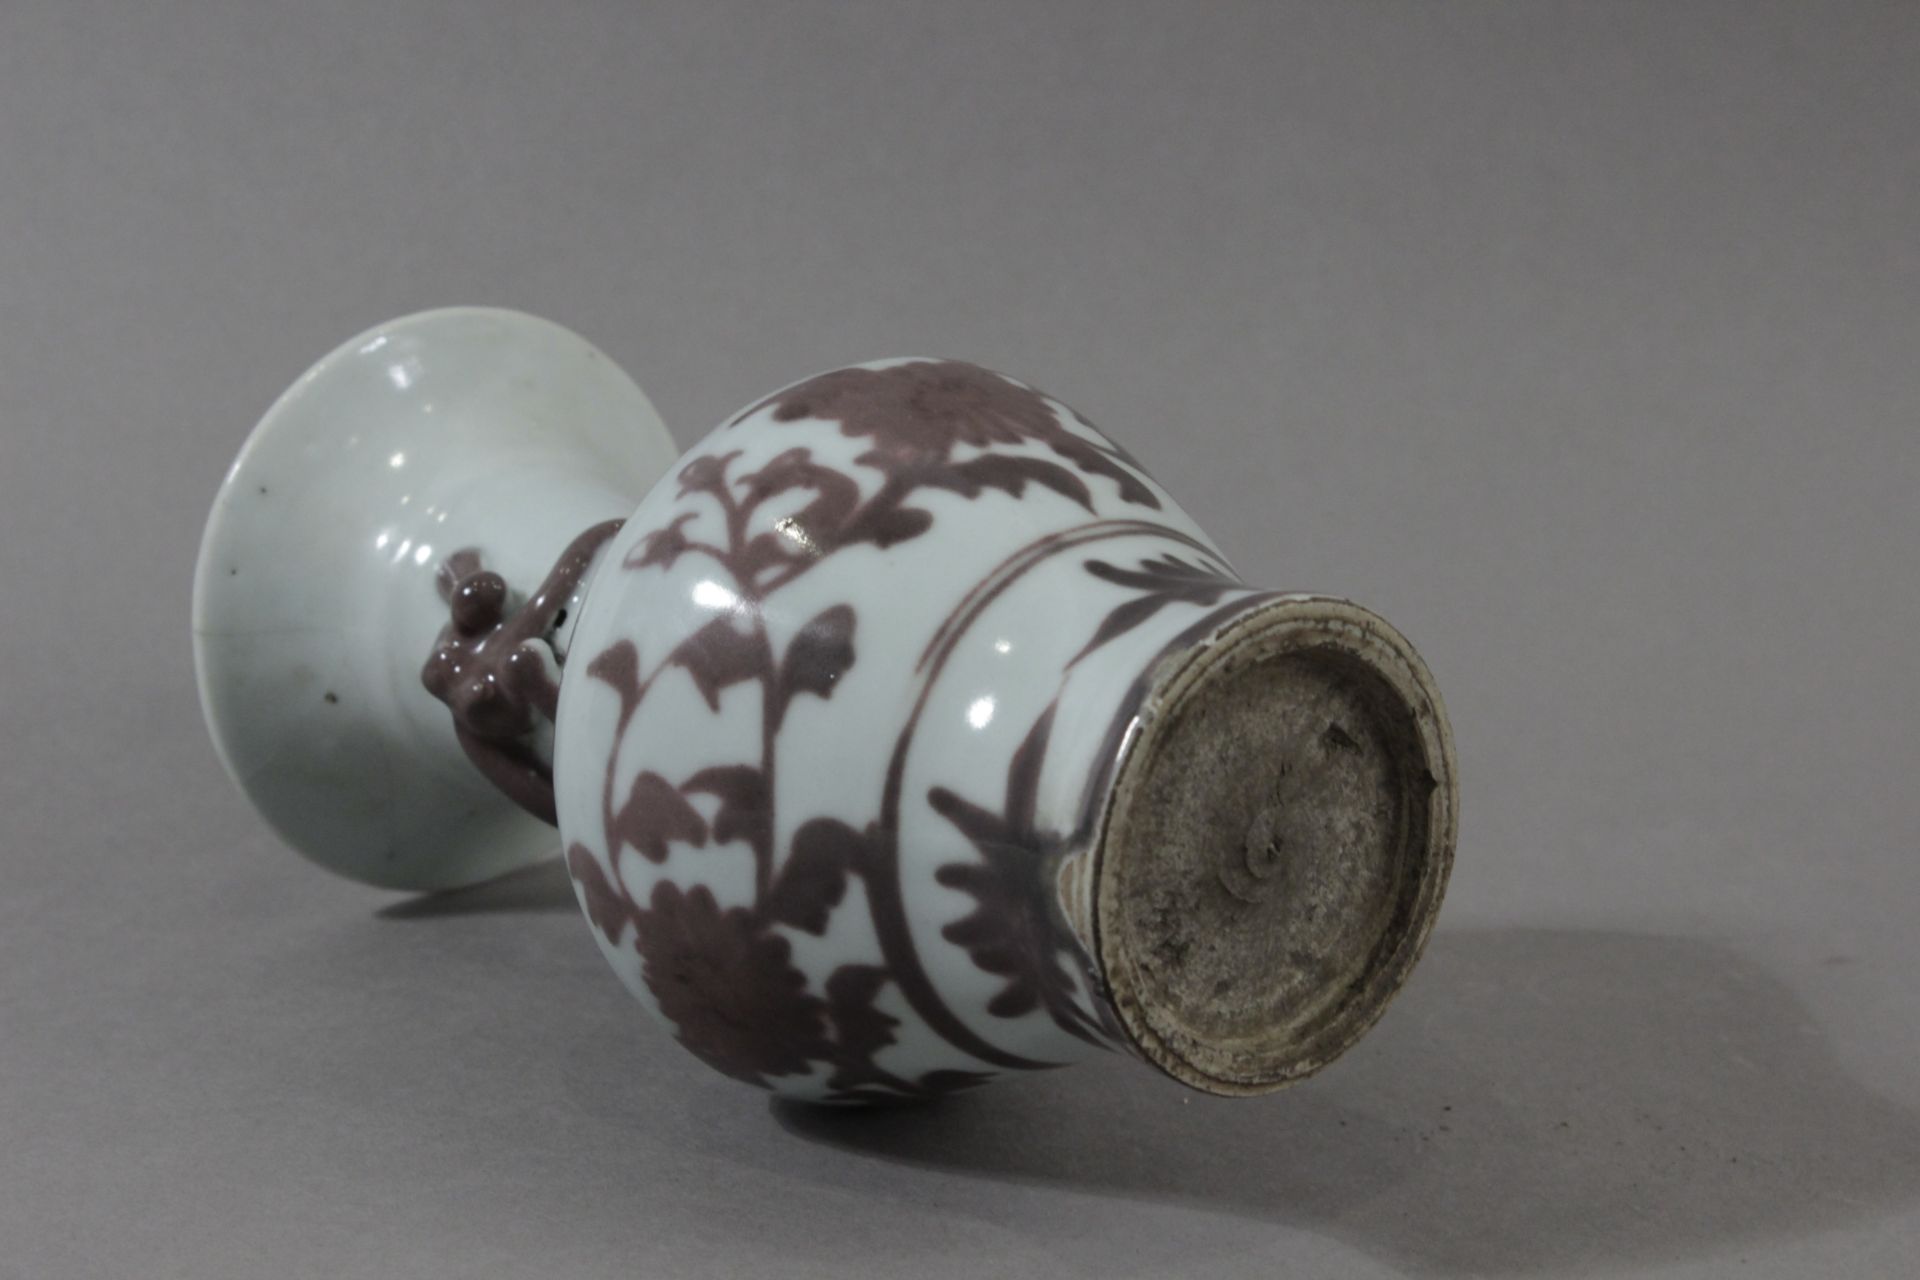 A 20th century Chinese vase from Republic period in celadon porcelain - Image 6 of 7